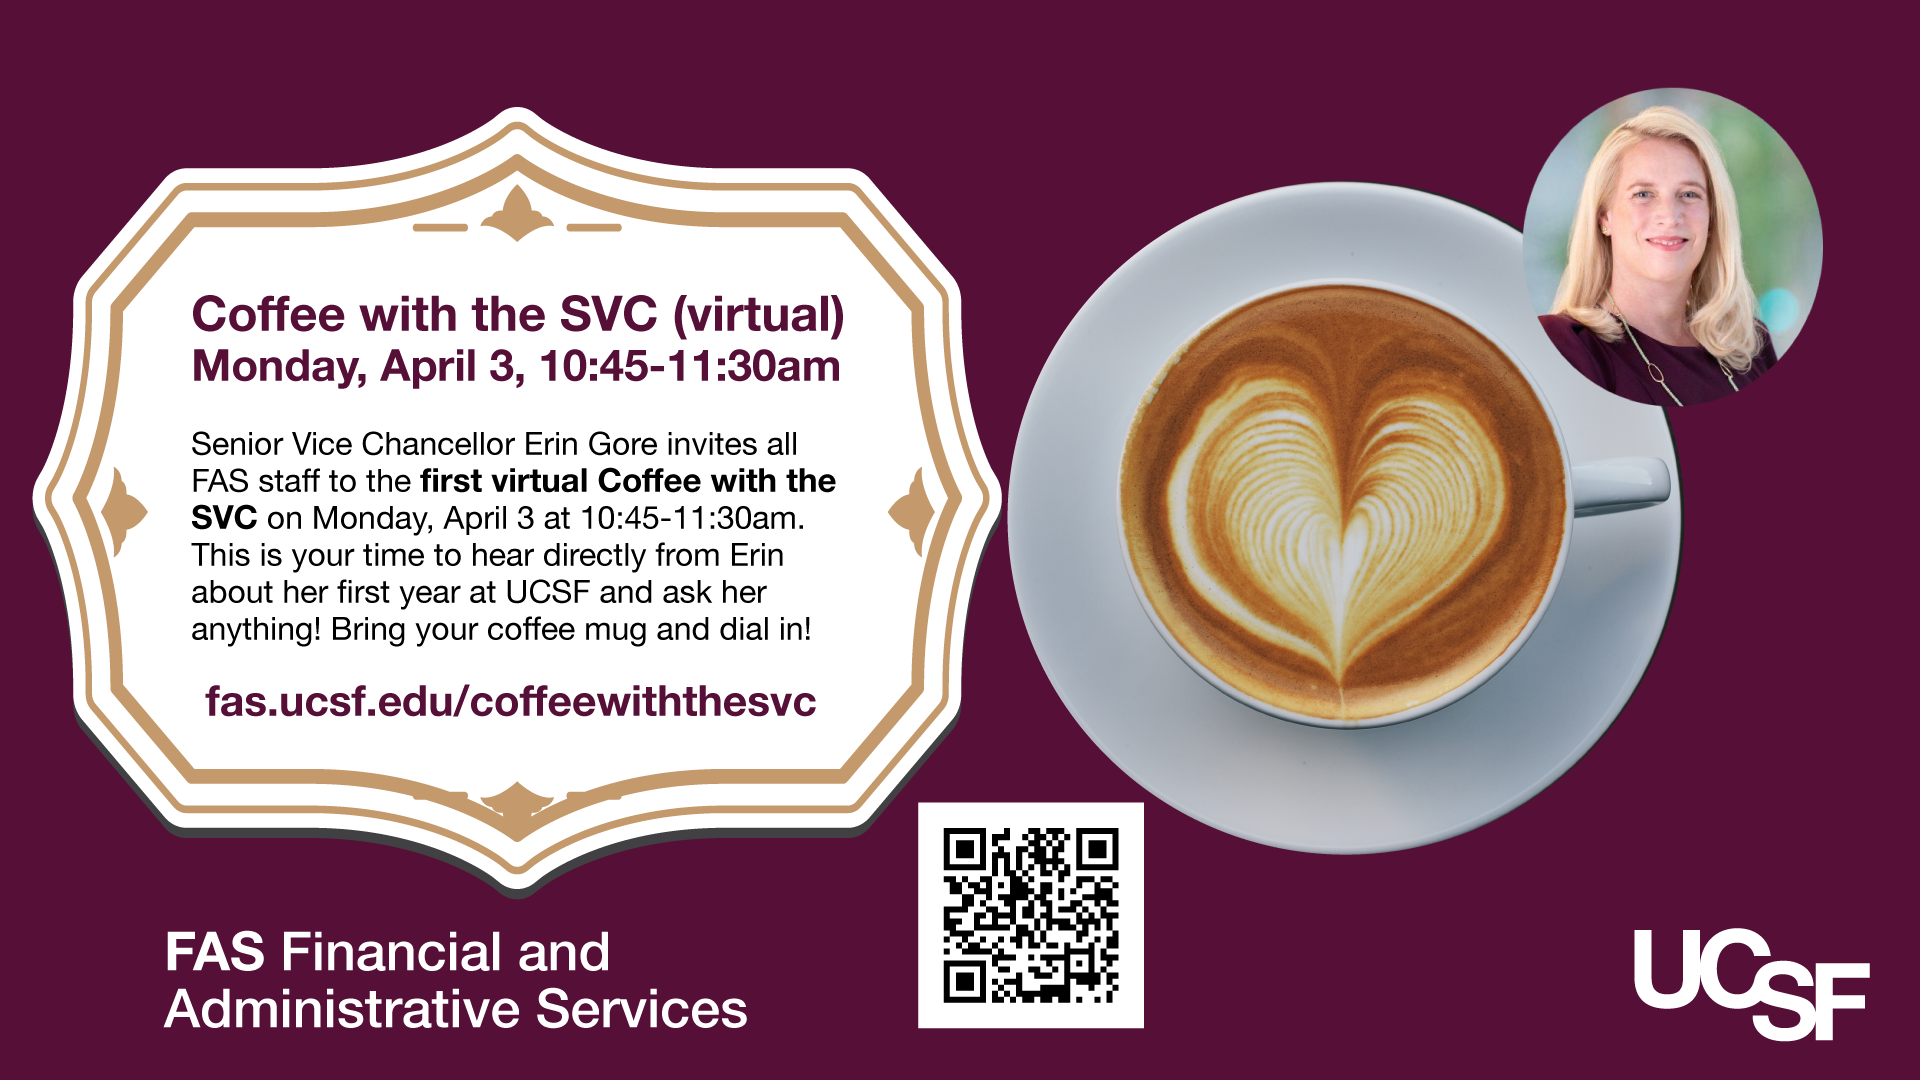 Coffee with the SVC (virtual) Monday, April 3, 10:45-11:30am